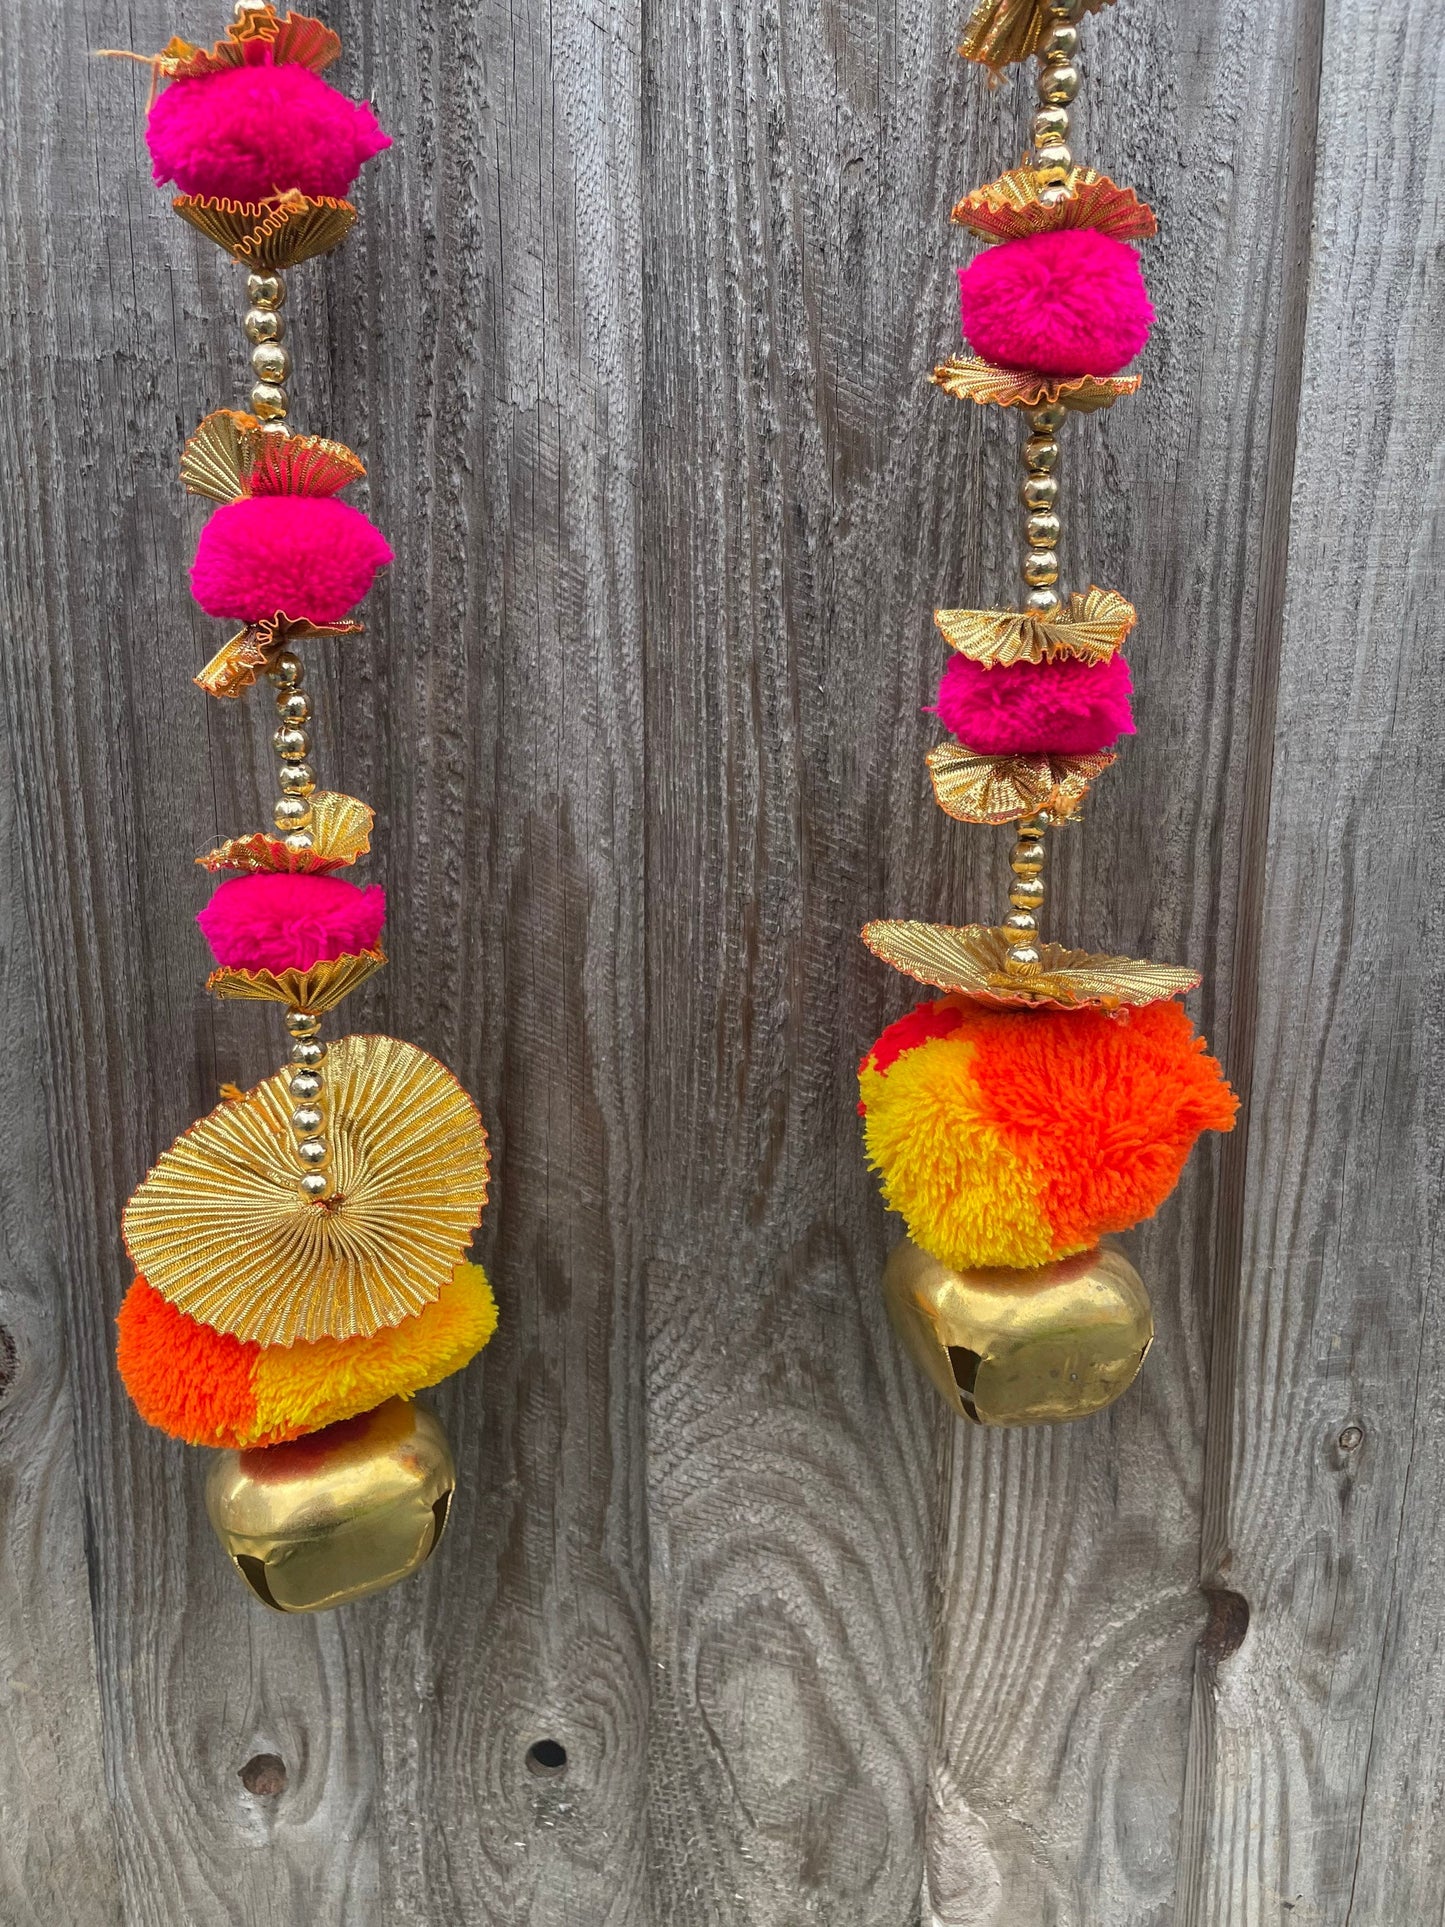 Pair of PomPom Ringing Cowbell Hanging Strings for Diwali Decor Garden Party Decoration Outdoor Backdrops Event Weddings Home Decor New Home